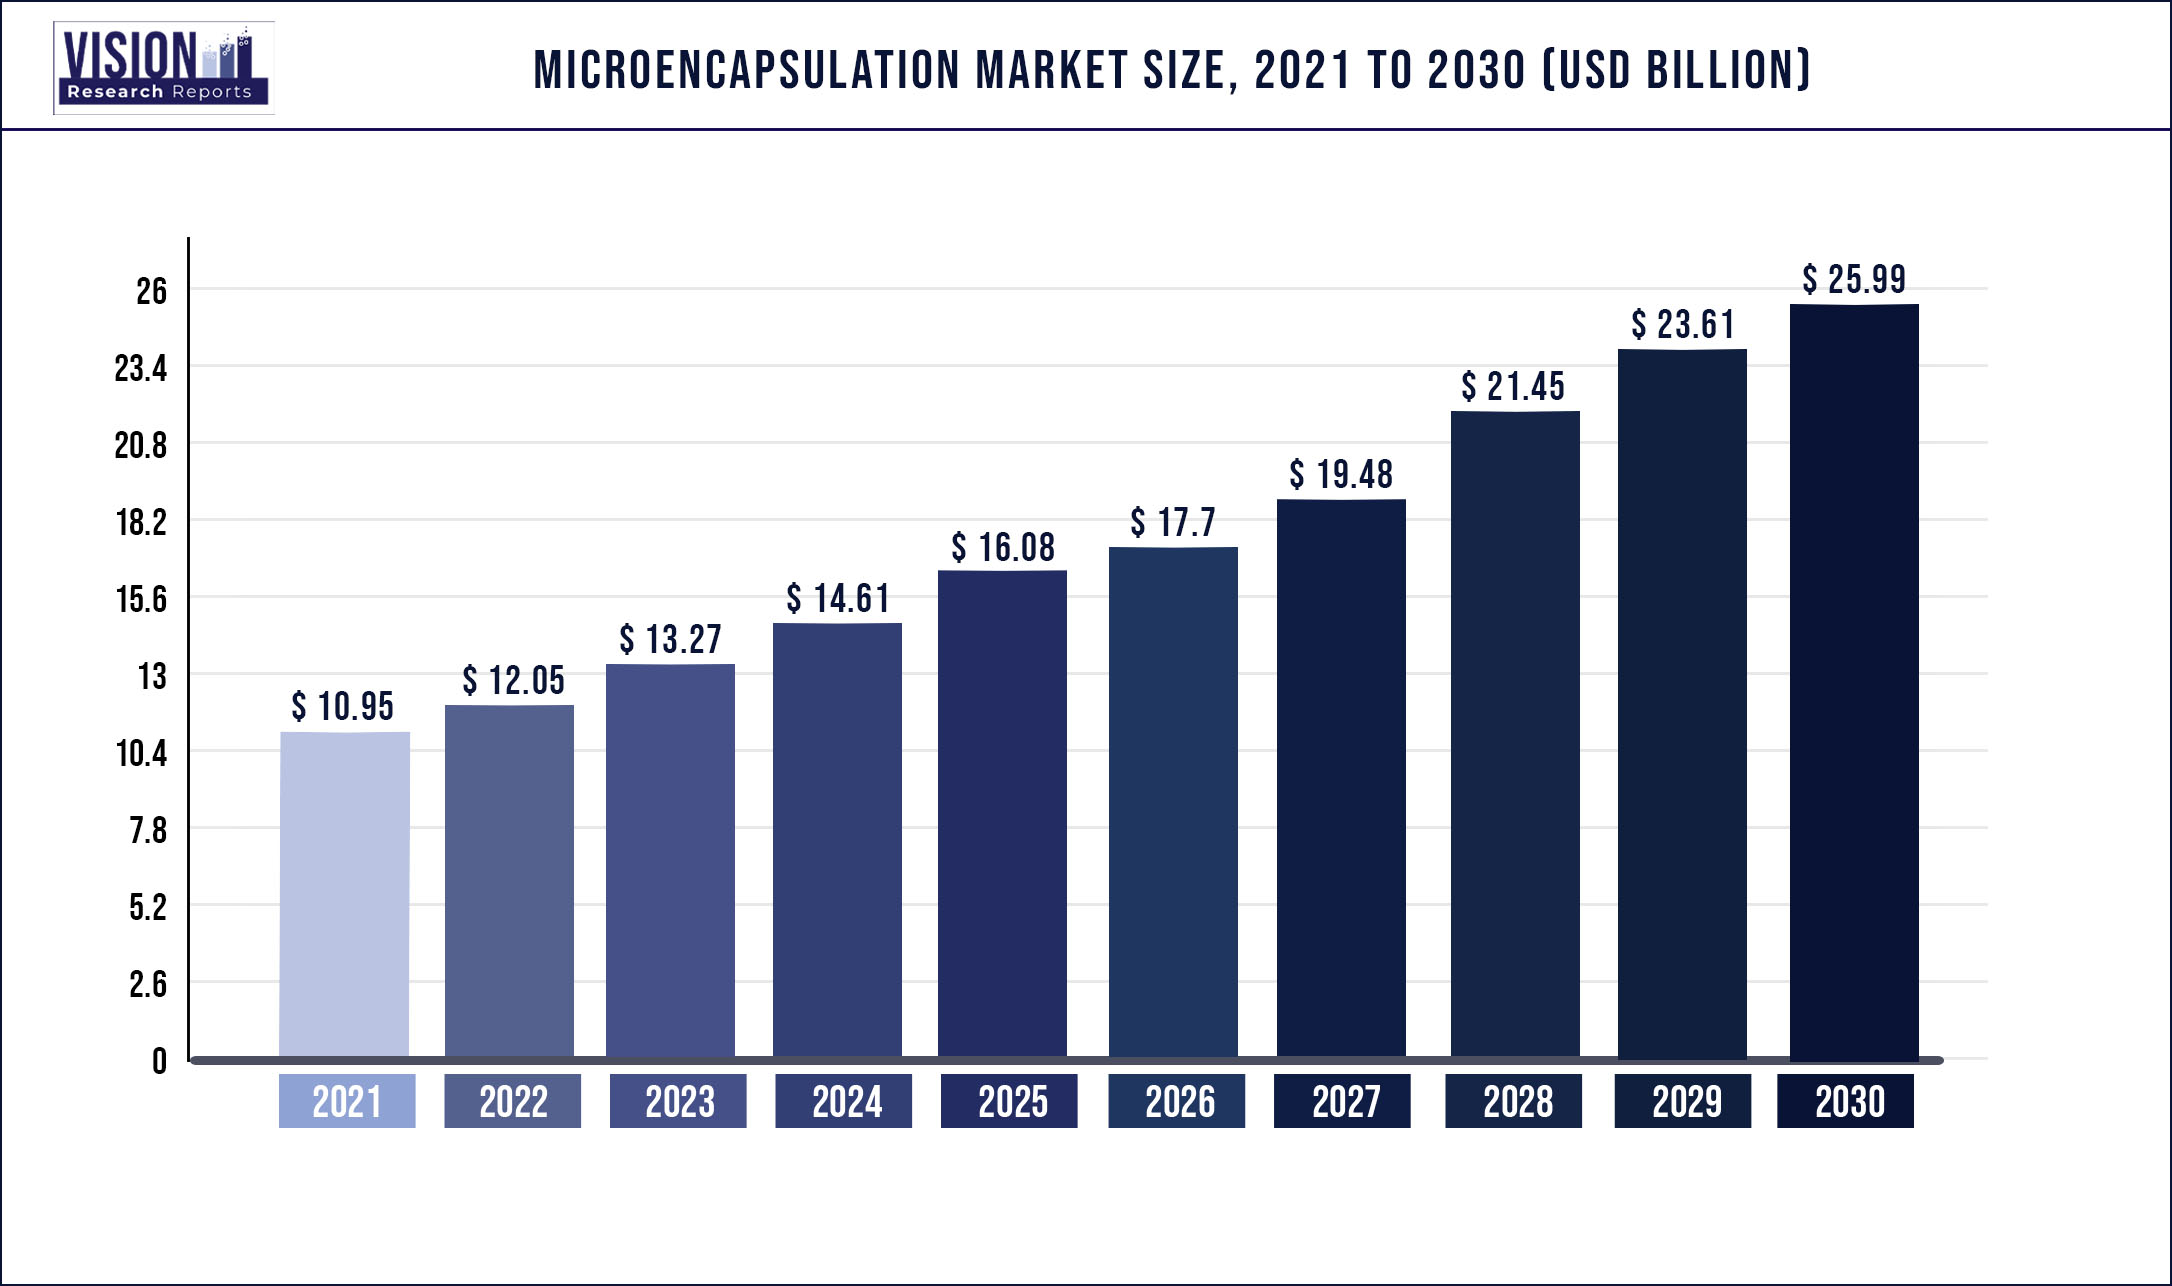 Microencapsulation Market Size 2021 to 2030